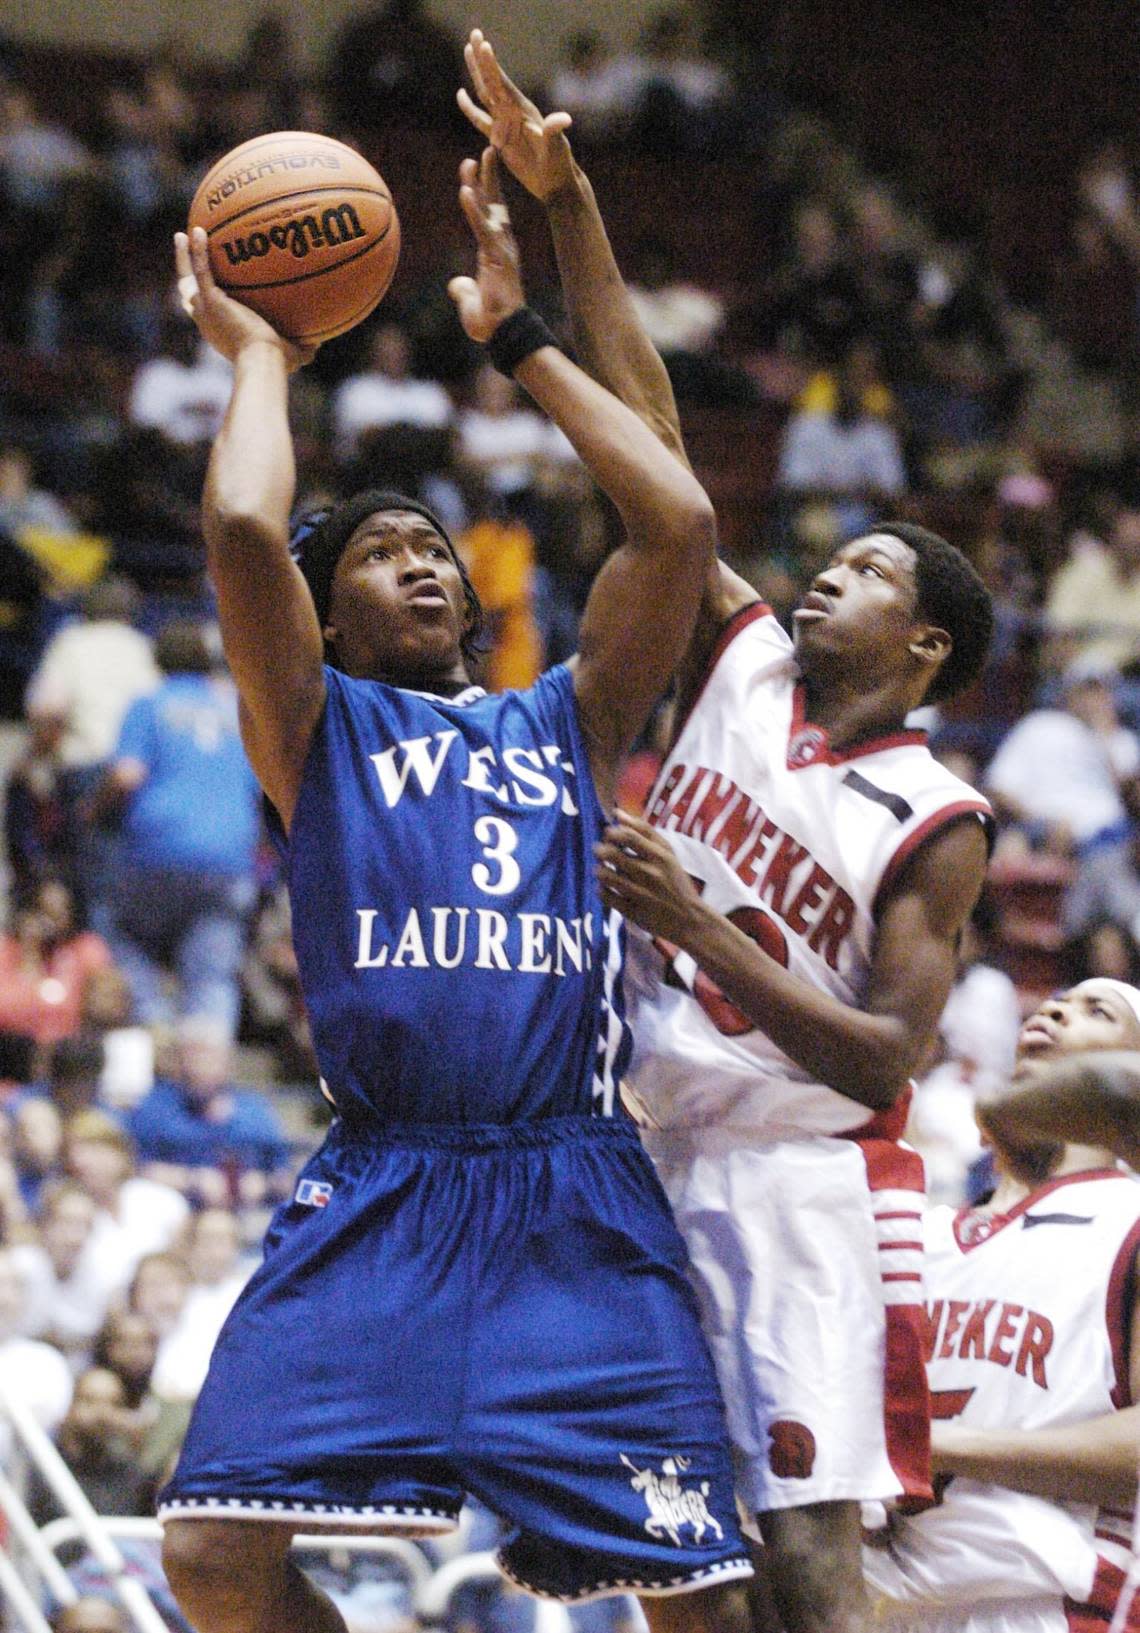 In this 2004 Telegraph file photo, West Laurens’ Demaryius Thomas draws a foul from Banneker’s Mychael Harris. Thomas would go on to play football for Georgia Tech and spend 10 seasons in the NFL with the Broncos, Texans and Jets. He died Thursday at age 33.